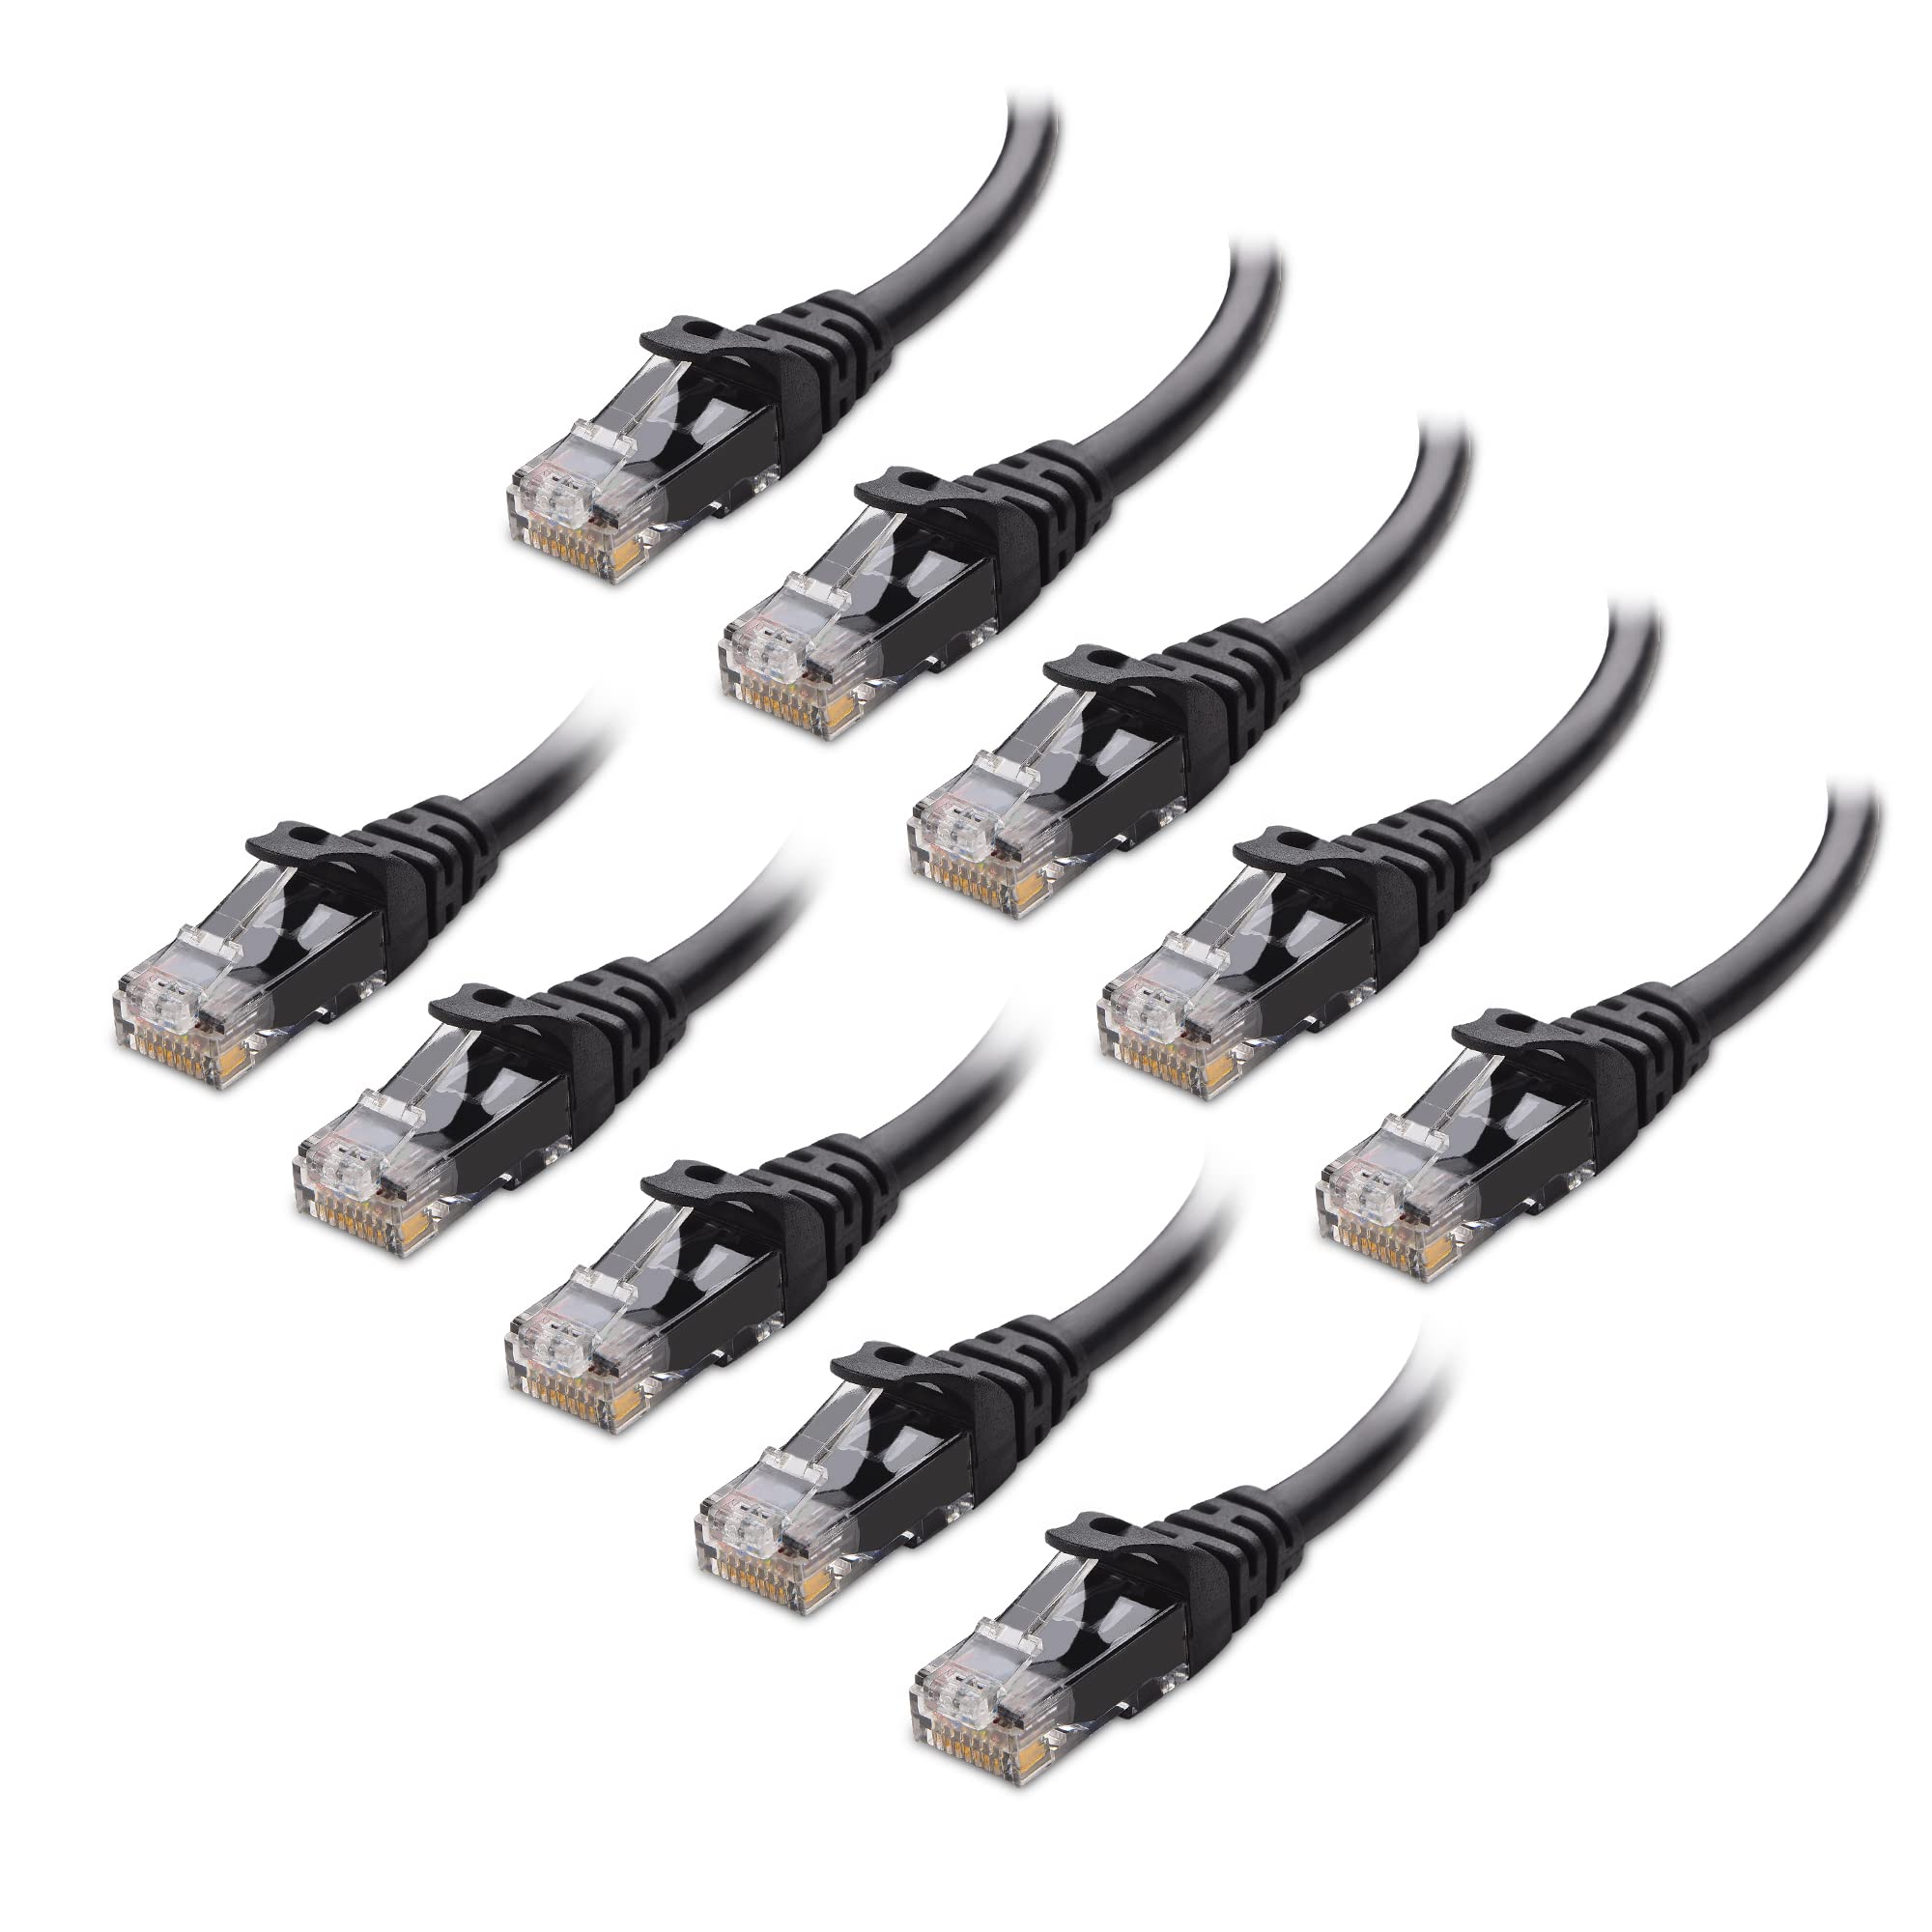 Book Cover Cable Matters 10Gbps 10-Pack Snagless Short Cat 6 Ethernet Cable 1 ft (Cat 6 Cable, Cat6 Cable, Internet Cable, Network Cable) in Black 1 Foot